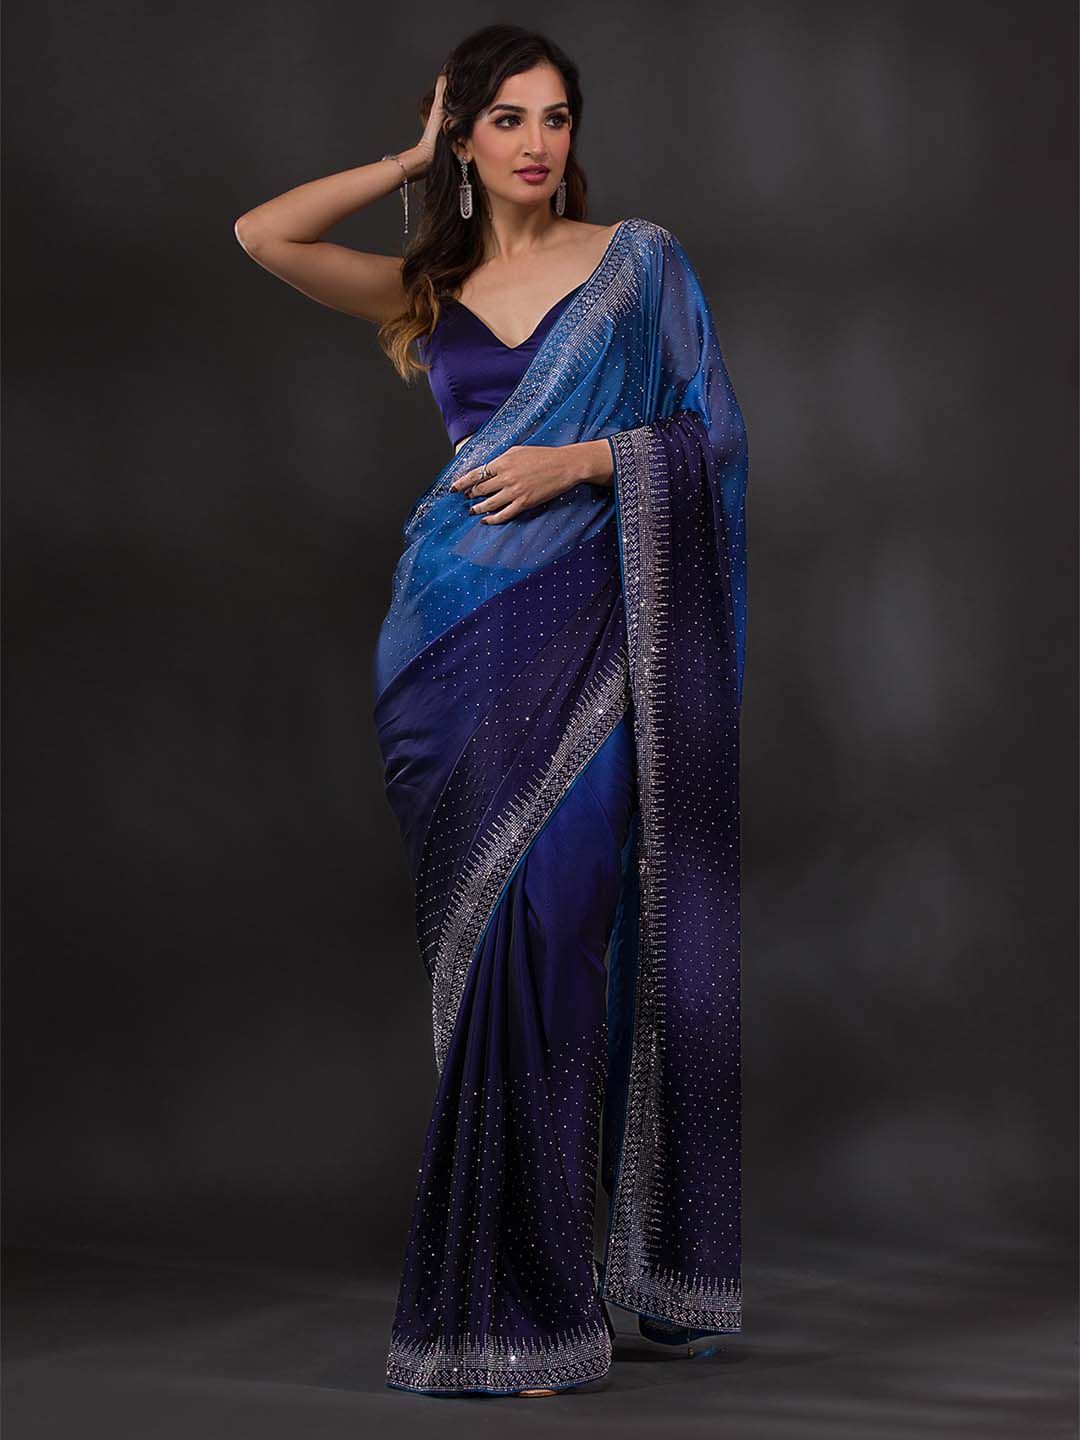 Koskii Navy Blue & Silver-Toned Embellished Embroidered Saree Price in India